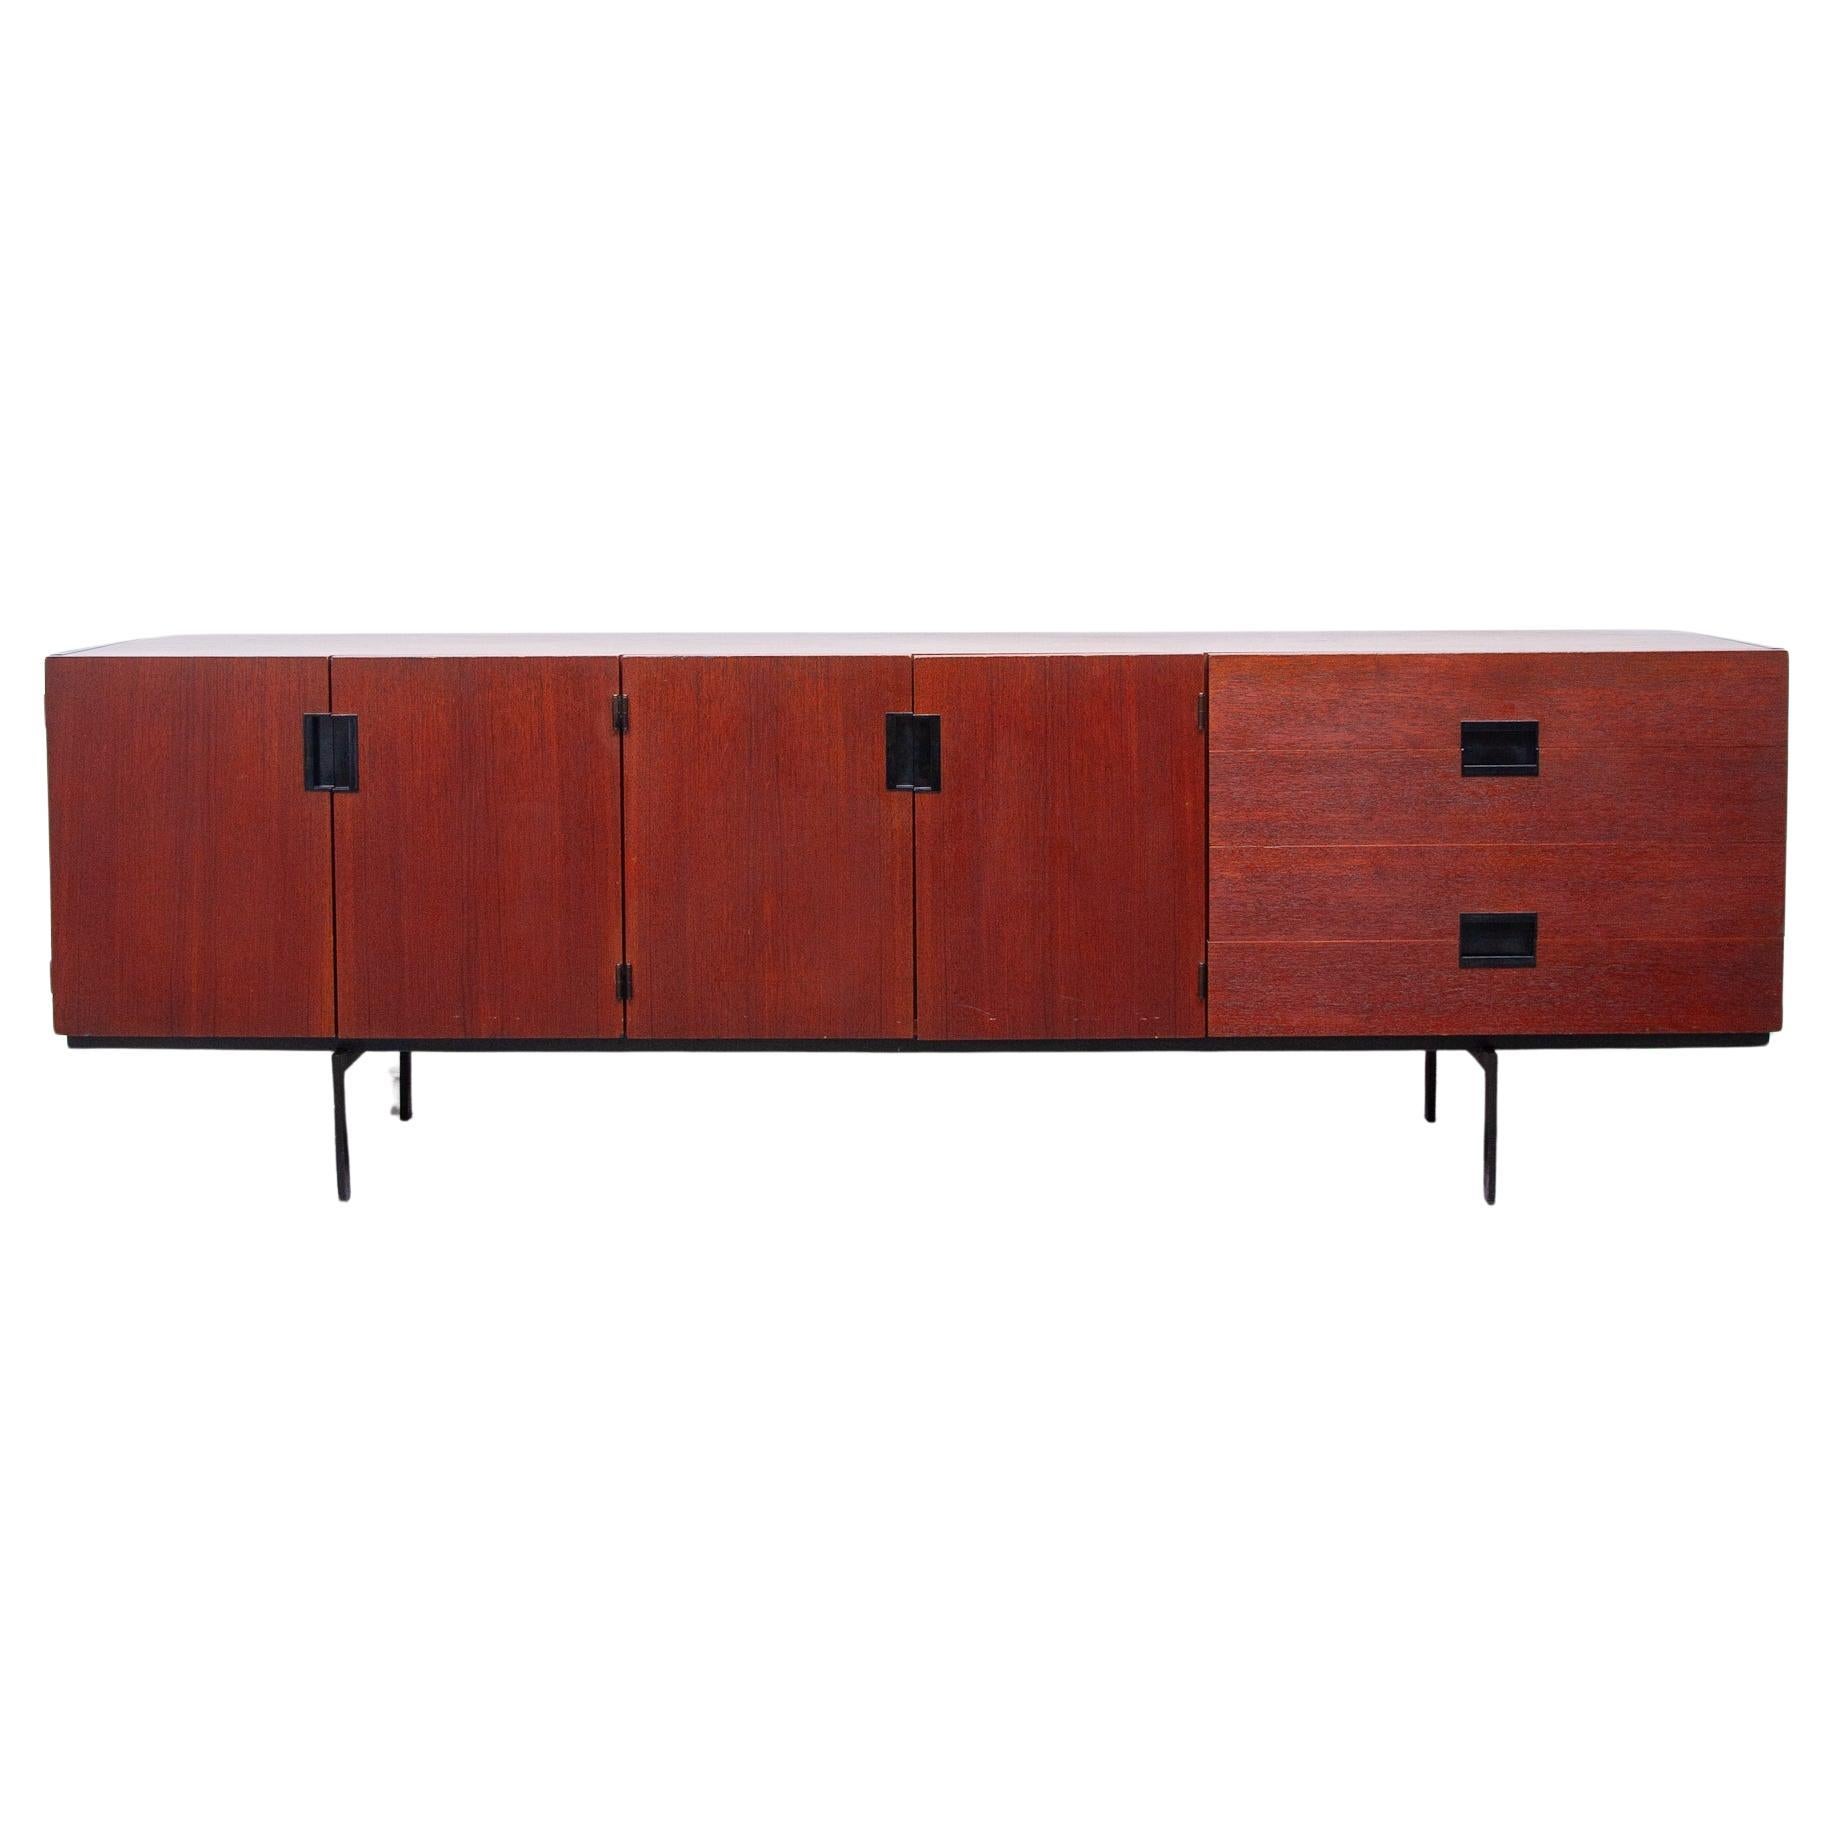 Japanese Serie DU03  Sideboard by Cees Braakman for Pastoe 1958, Dutch design For Sale